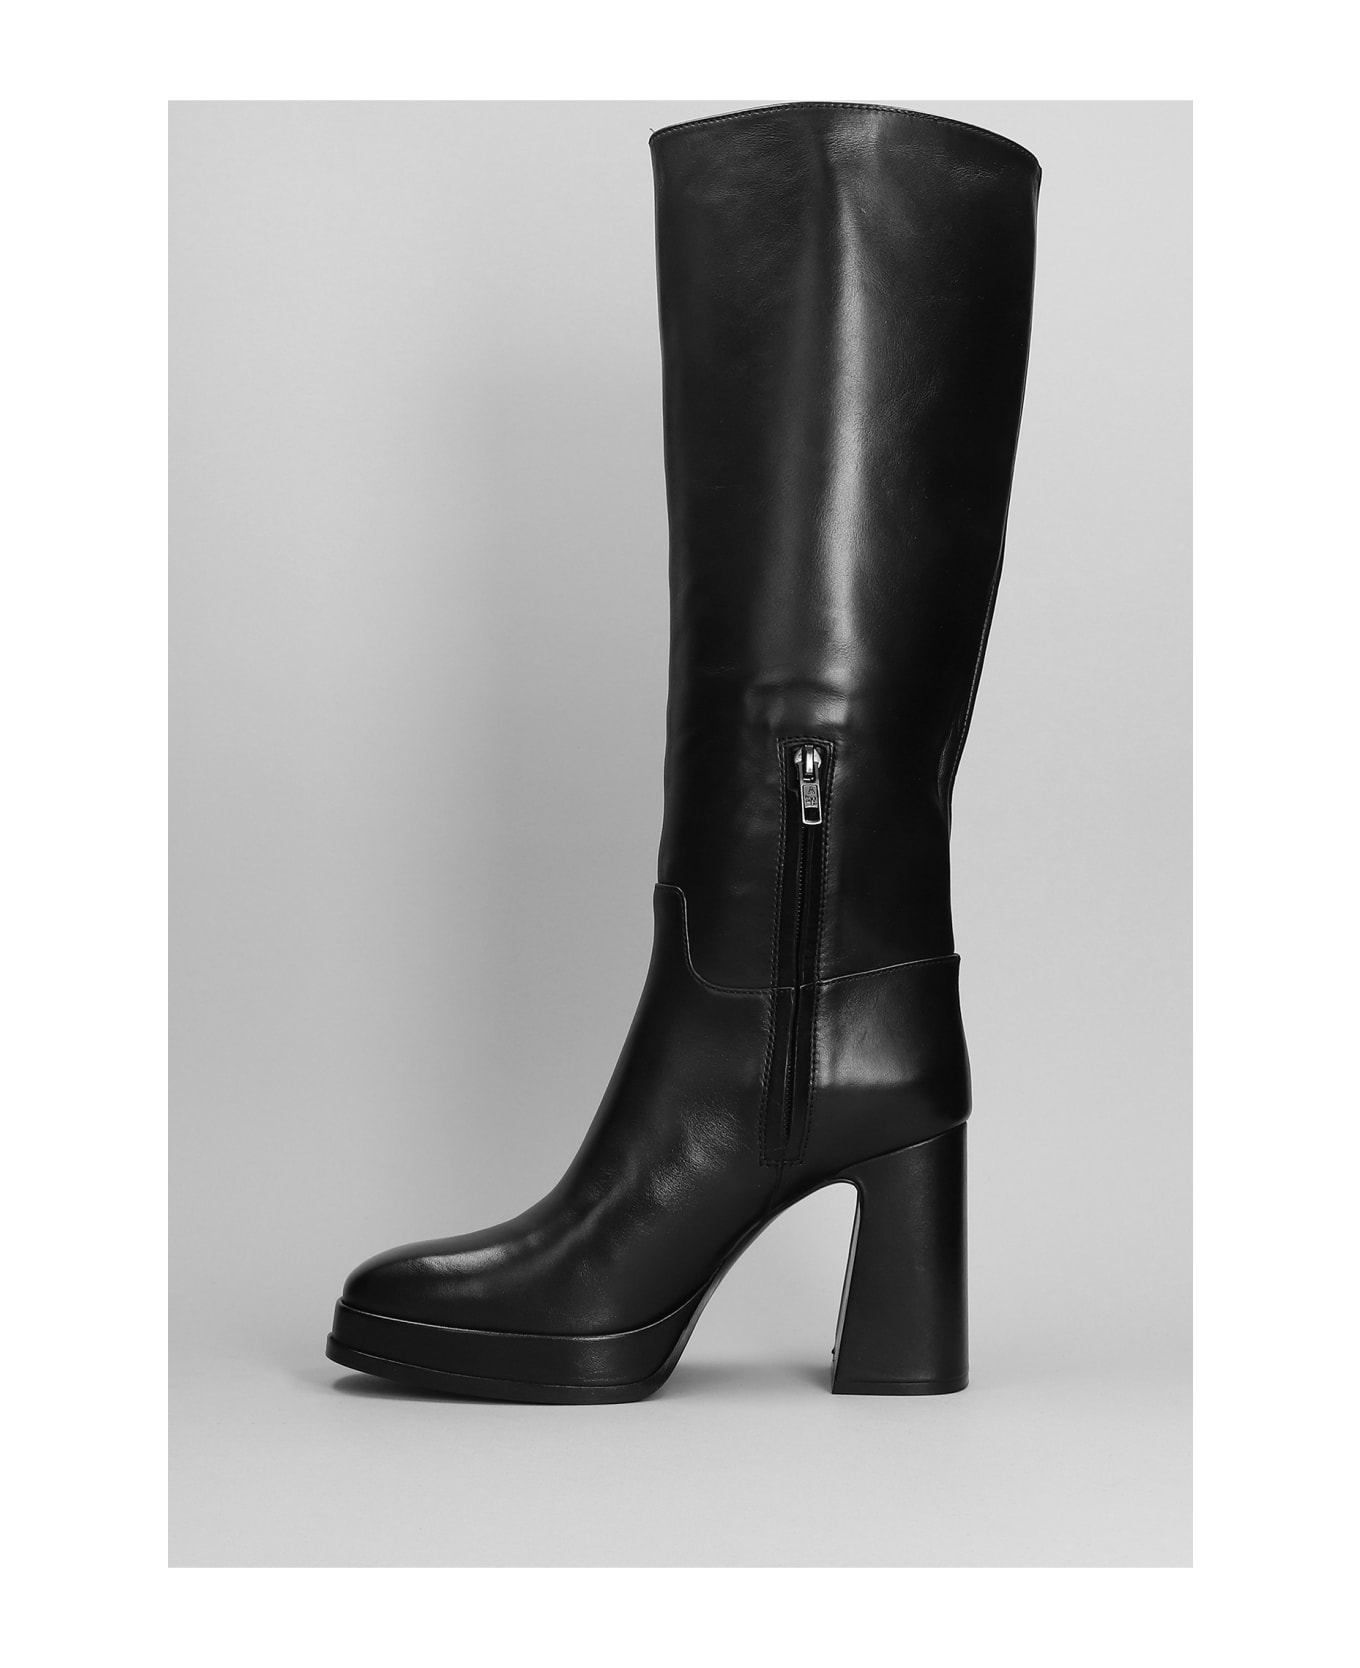 Ash Amy High Heels Boots In Black Leather - black